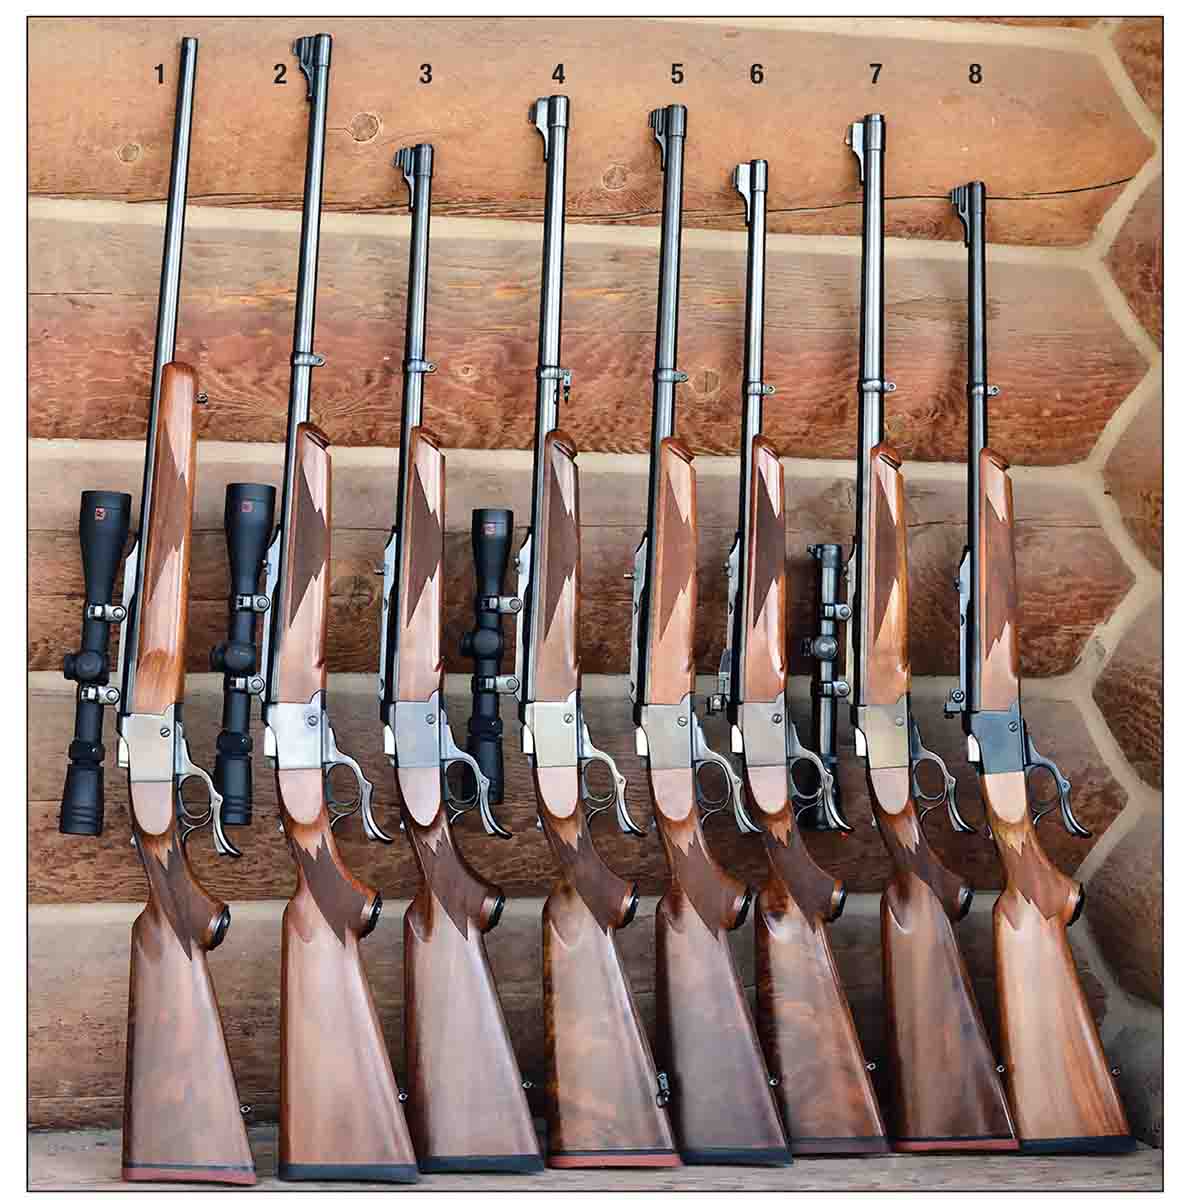 The Ruger No. 1 has been offered in more than 63 calibers. A few examples include: (1) 223 Remington, (2) 300 H&H Magnum, (3) 9.3x62mm, (4) 375 H&H Magnum, (5) 450/400 N.E. 3 inch, (6) 45-70 Government, (7) 458 Winchester Magnum and (8) 475 Linebaugh.